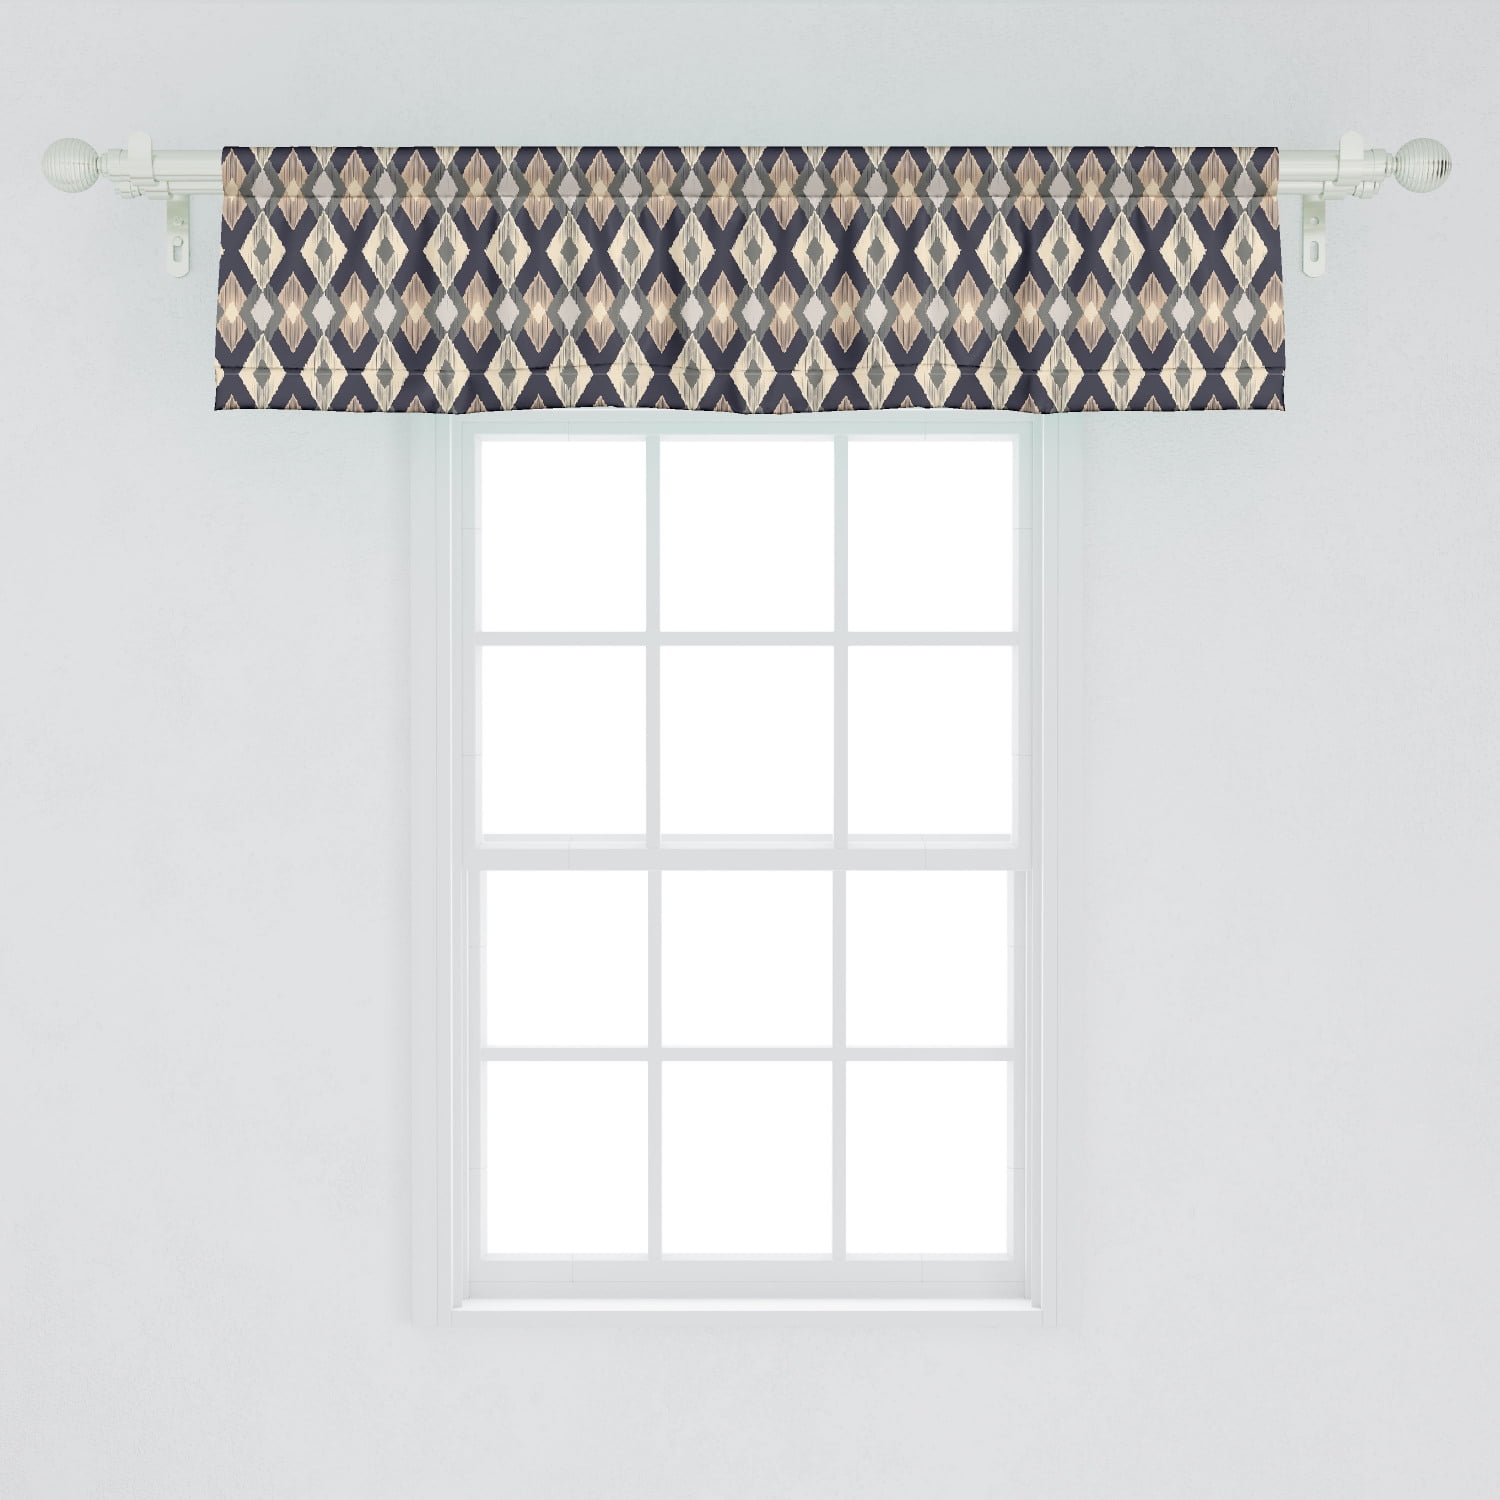 Ambesonne Boho Design Window Valance Curtain for Kitchen Bedroom in 2 Sizes 